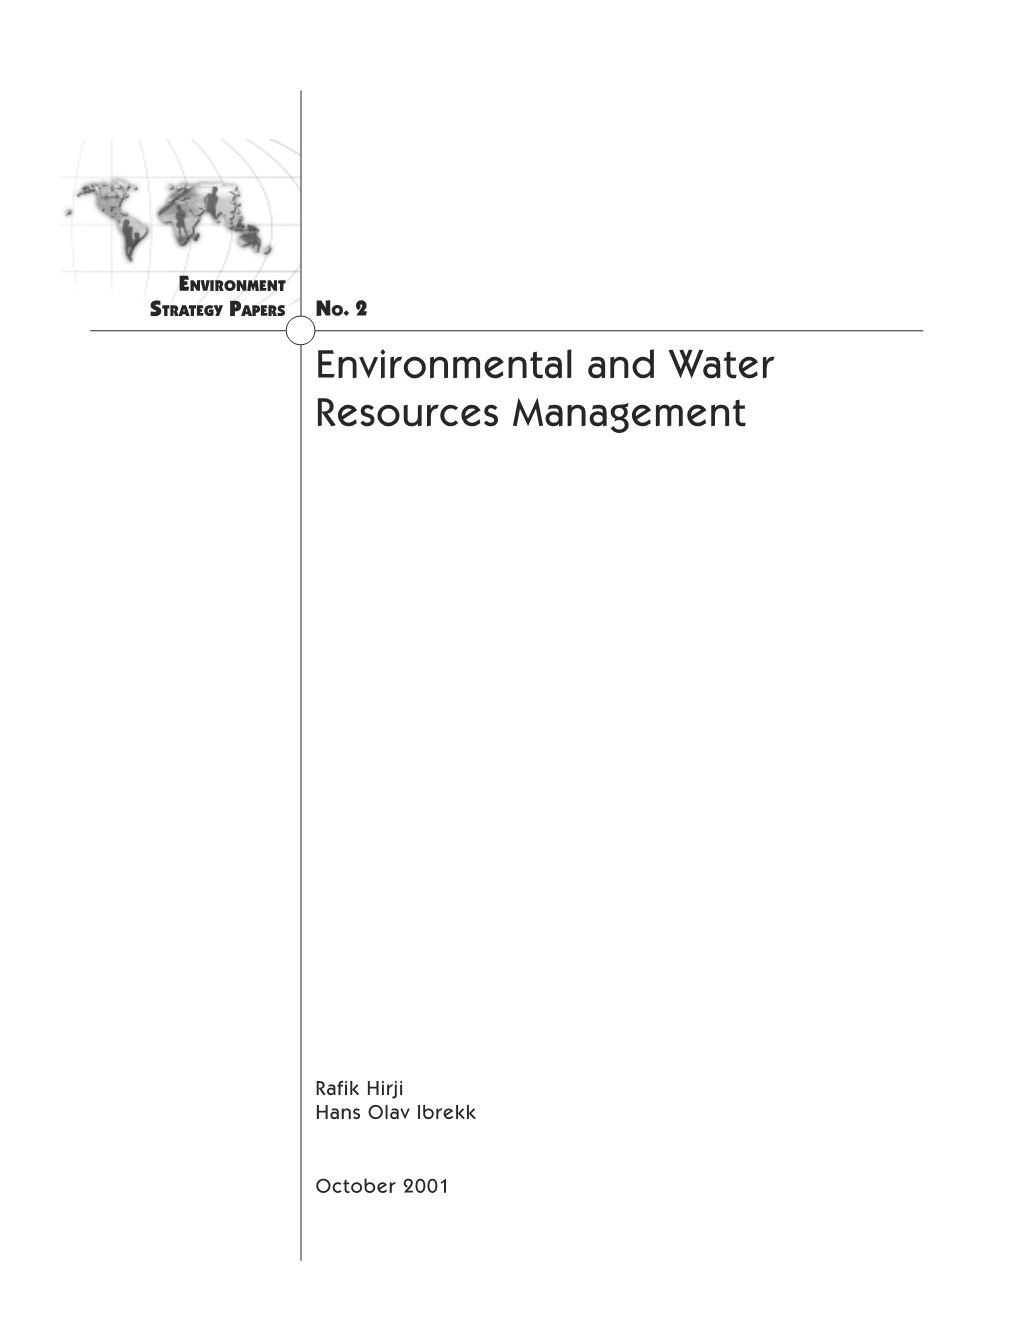 Environmental and Water Resources Management